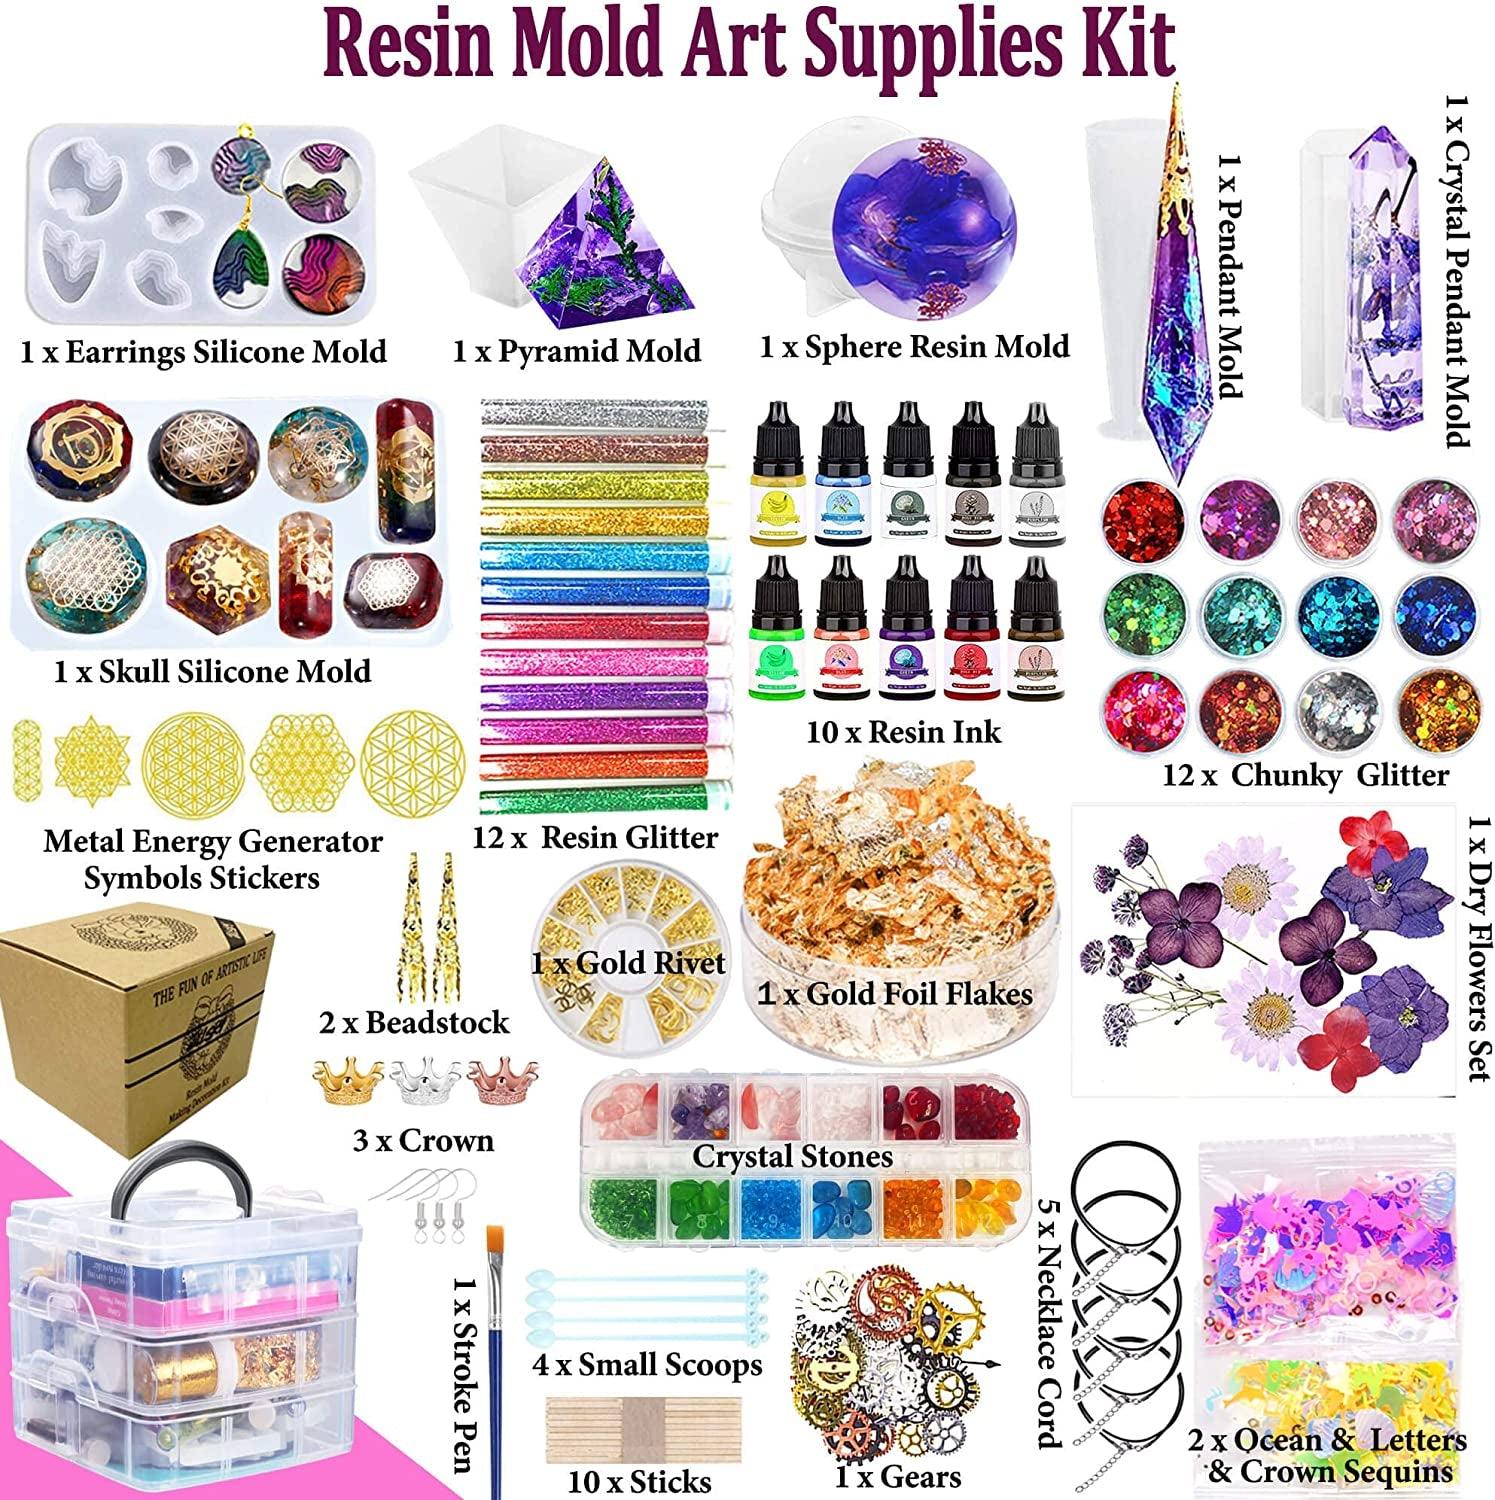 Resin Mold Kit for Beginners - 125PCS Contains Resin Orgone Chakra Pyramid Mold, Earring Necklace Mold - WoodArtSupply